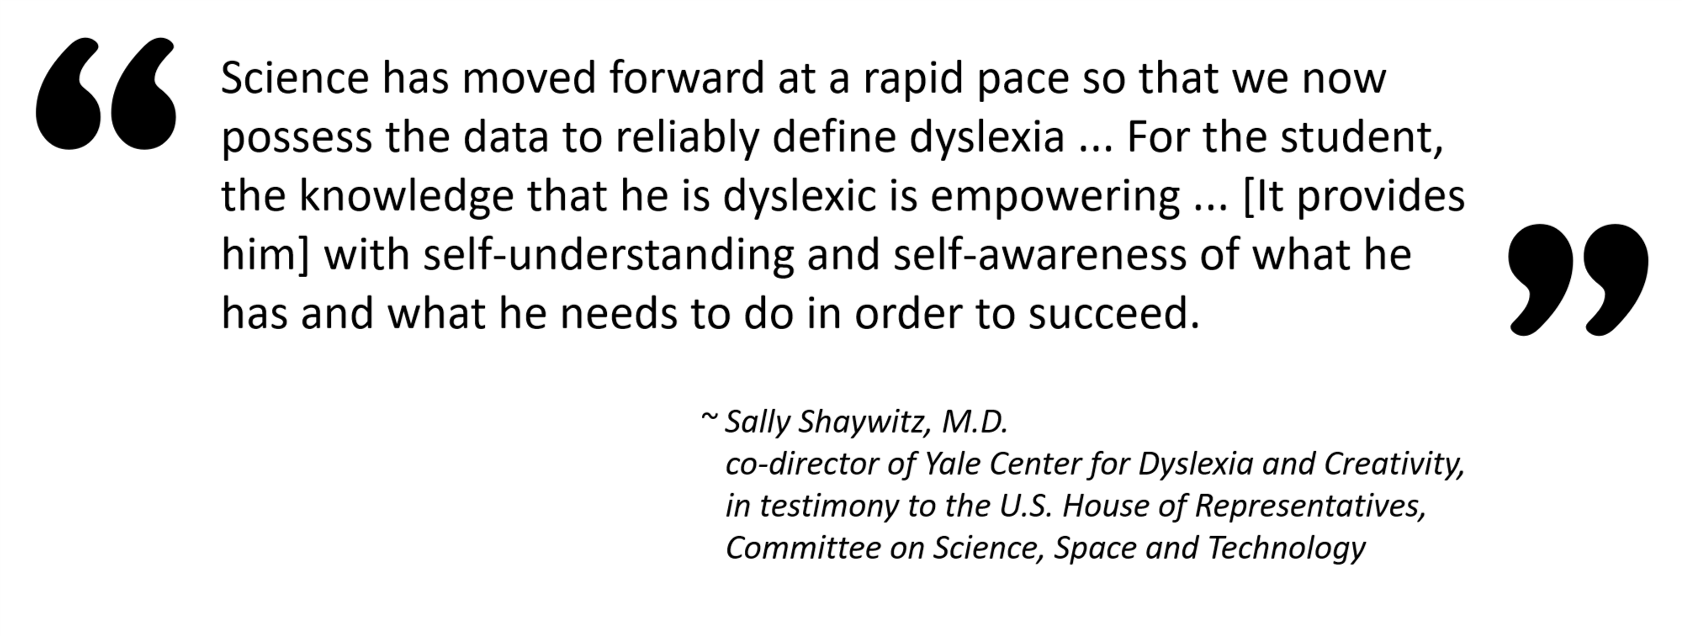 Image of a quote from Sally Shaywitz, M.D., co-director of Yale Center for Dyslexia and Creativity, in testimony to the U.S. House of Representatives, Committee on Science, Space and Technology. “Science has moved forward at a rapid pace so that we now possess the data to reliably define dyslexia ... For the student, the knowledge that he is dyslexic is empowering ... [It provides him] with self-understanding and self-awareness of what he has and what he needs to do in order to succeed.” 